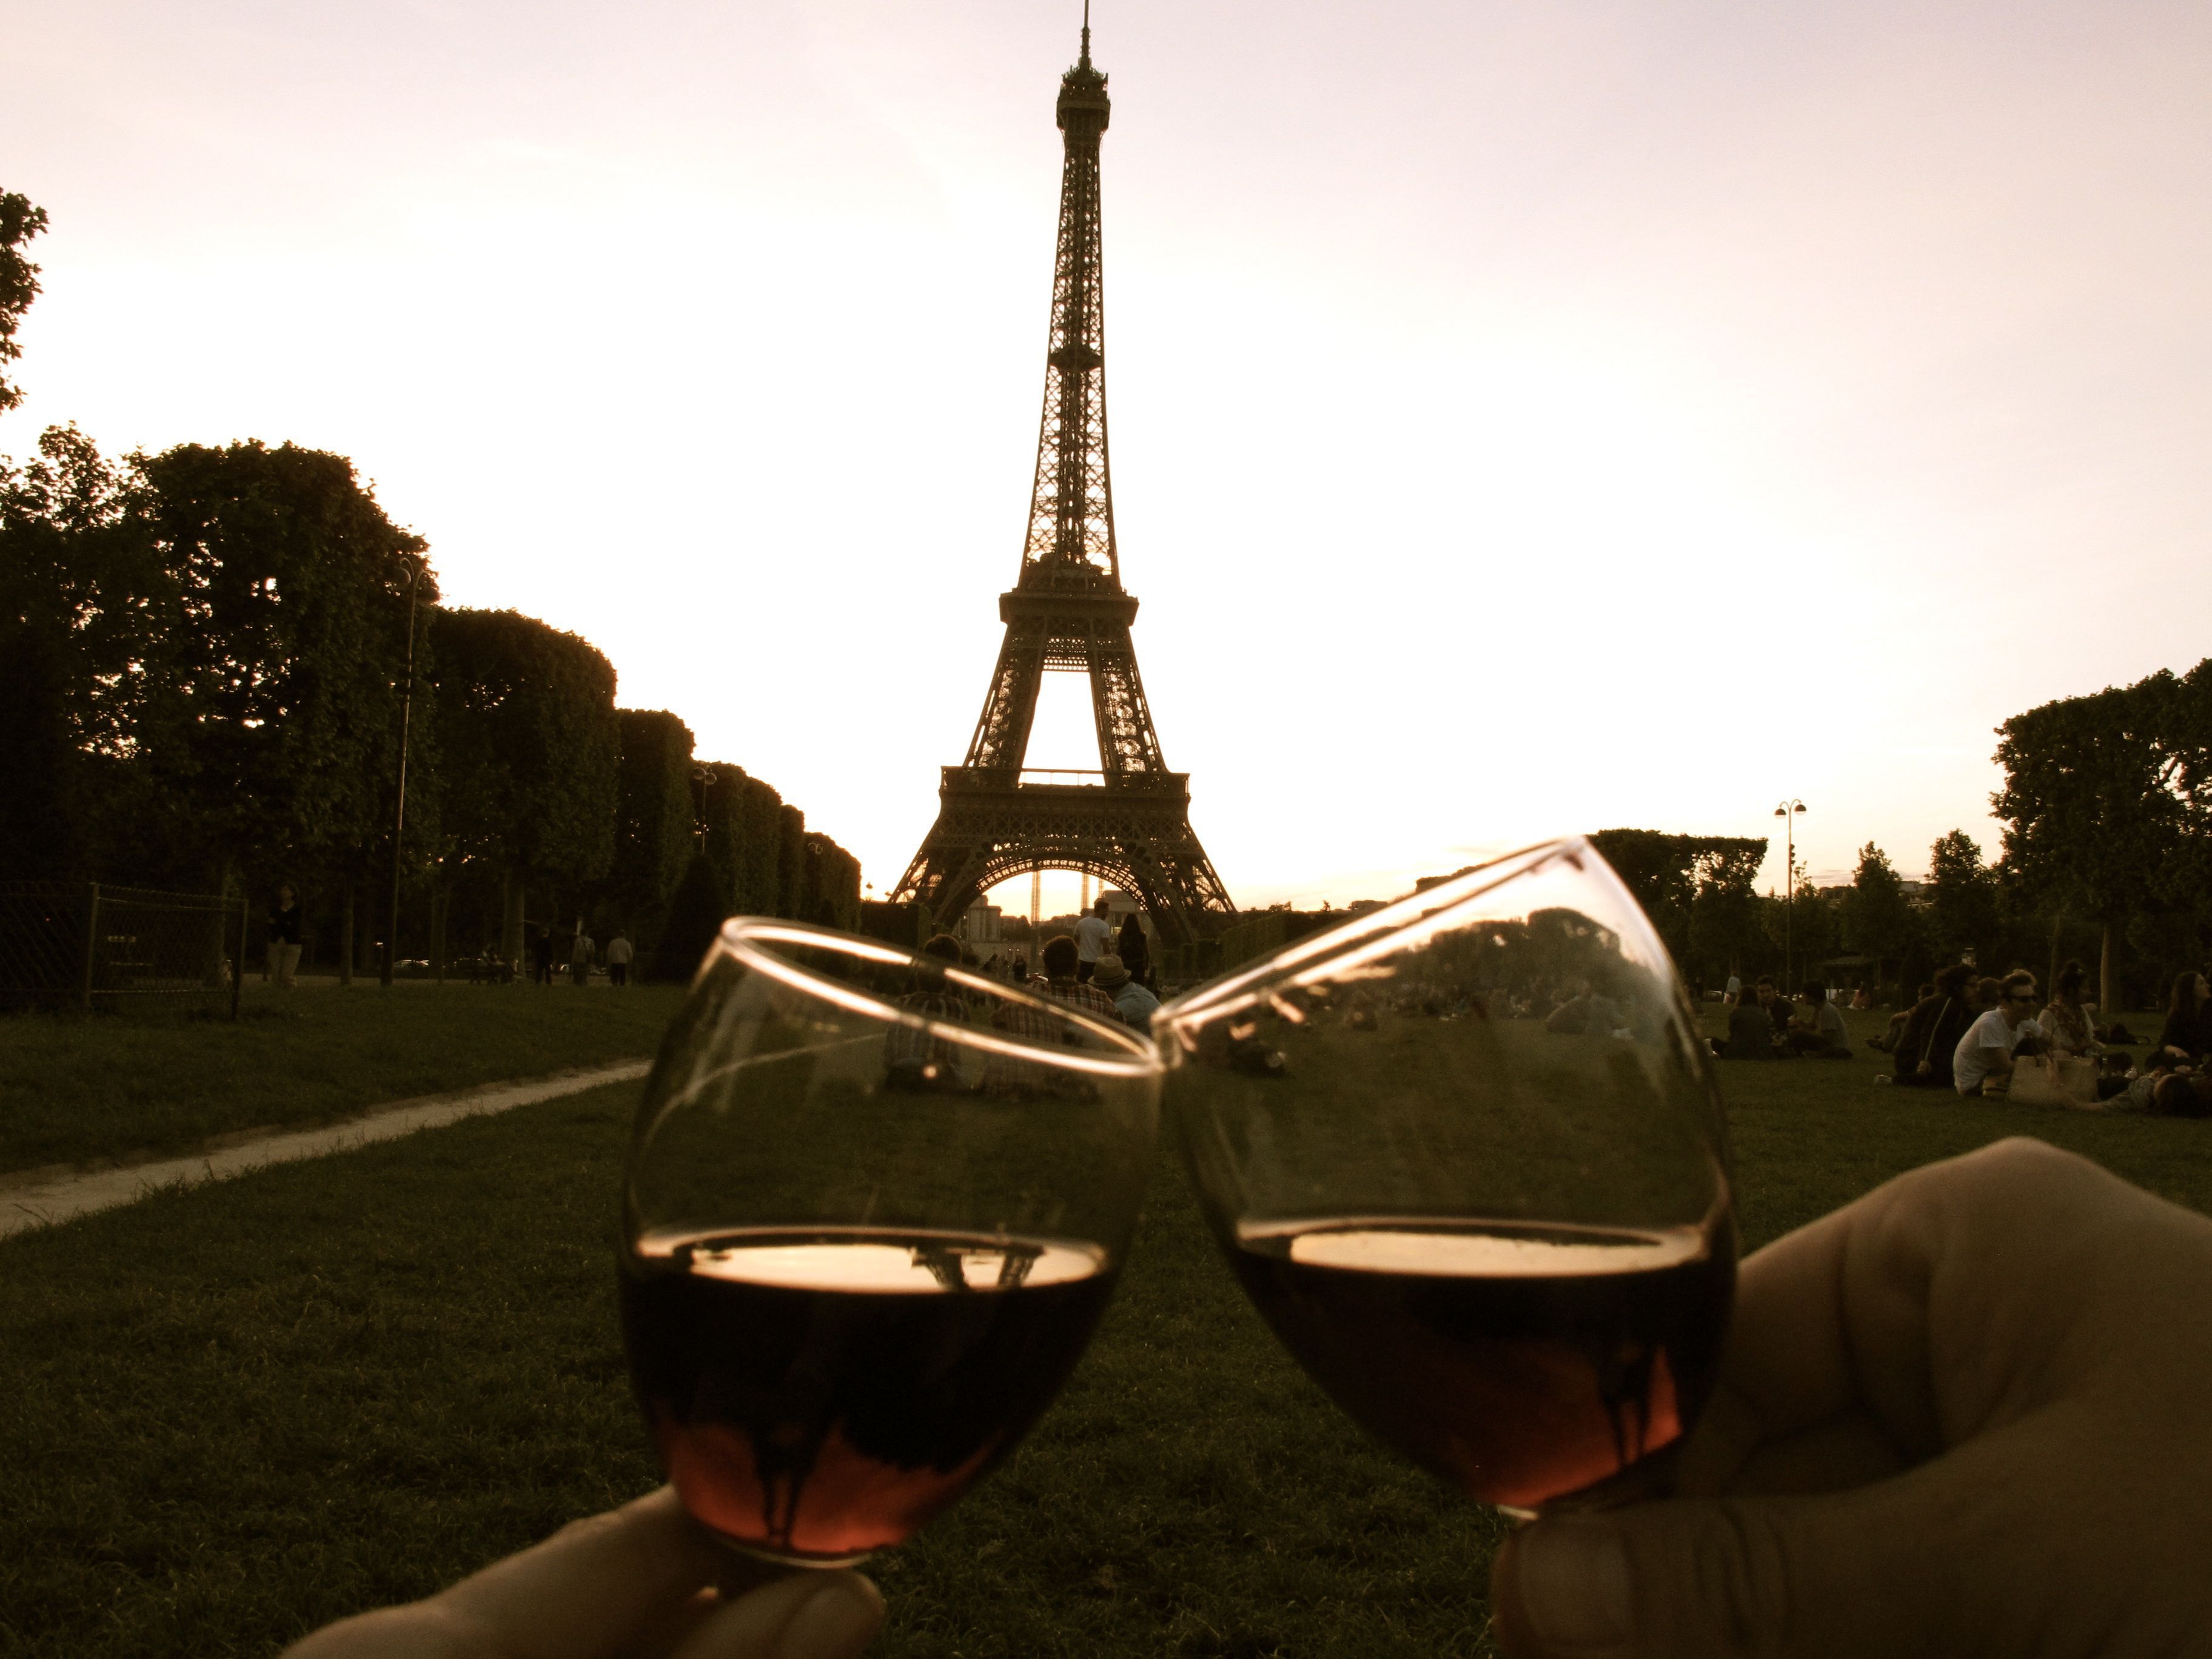 Red wine and the Eiffel Tower wallpapers and images - wallpapers